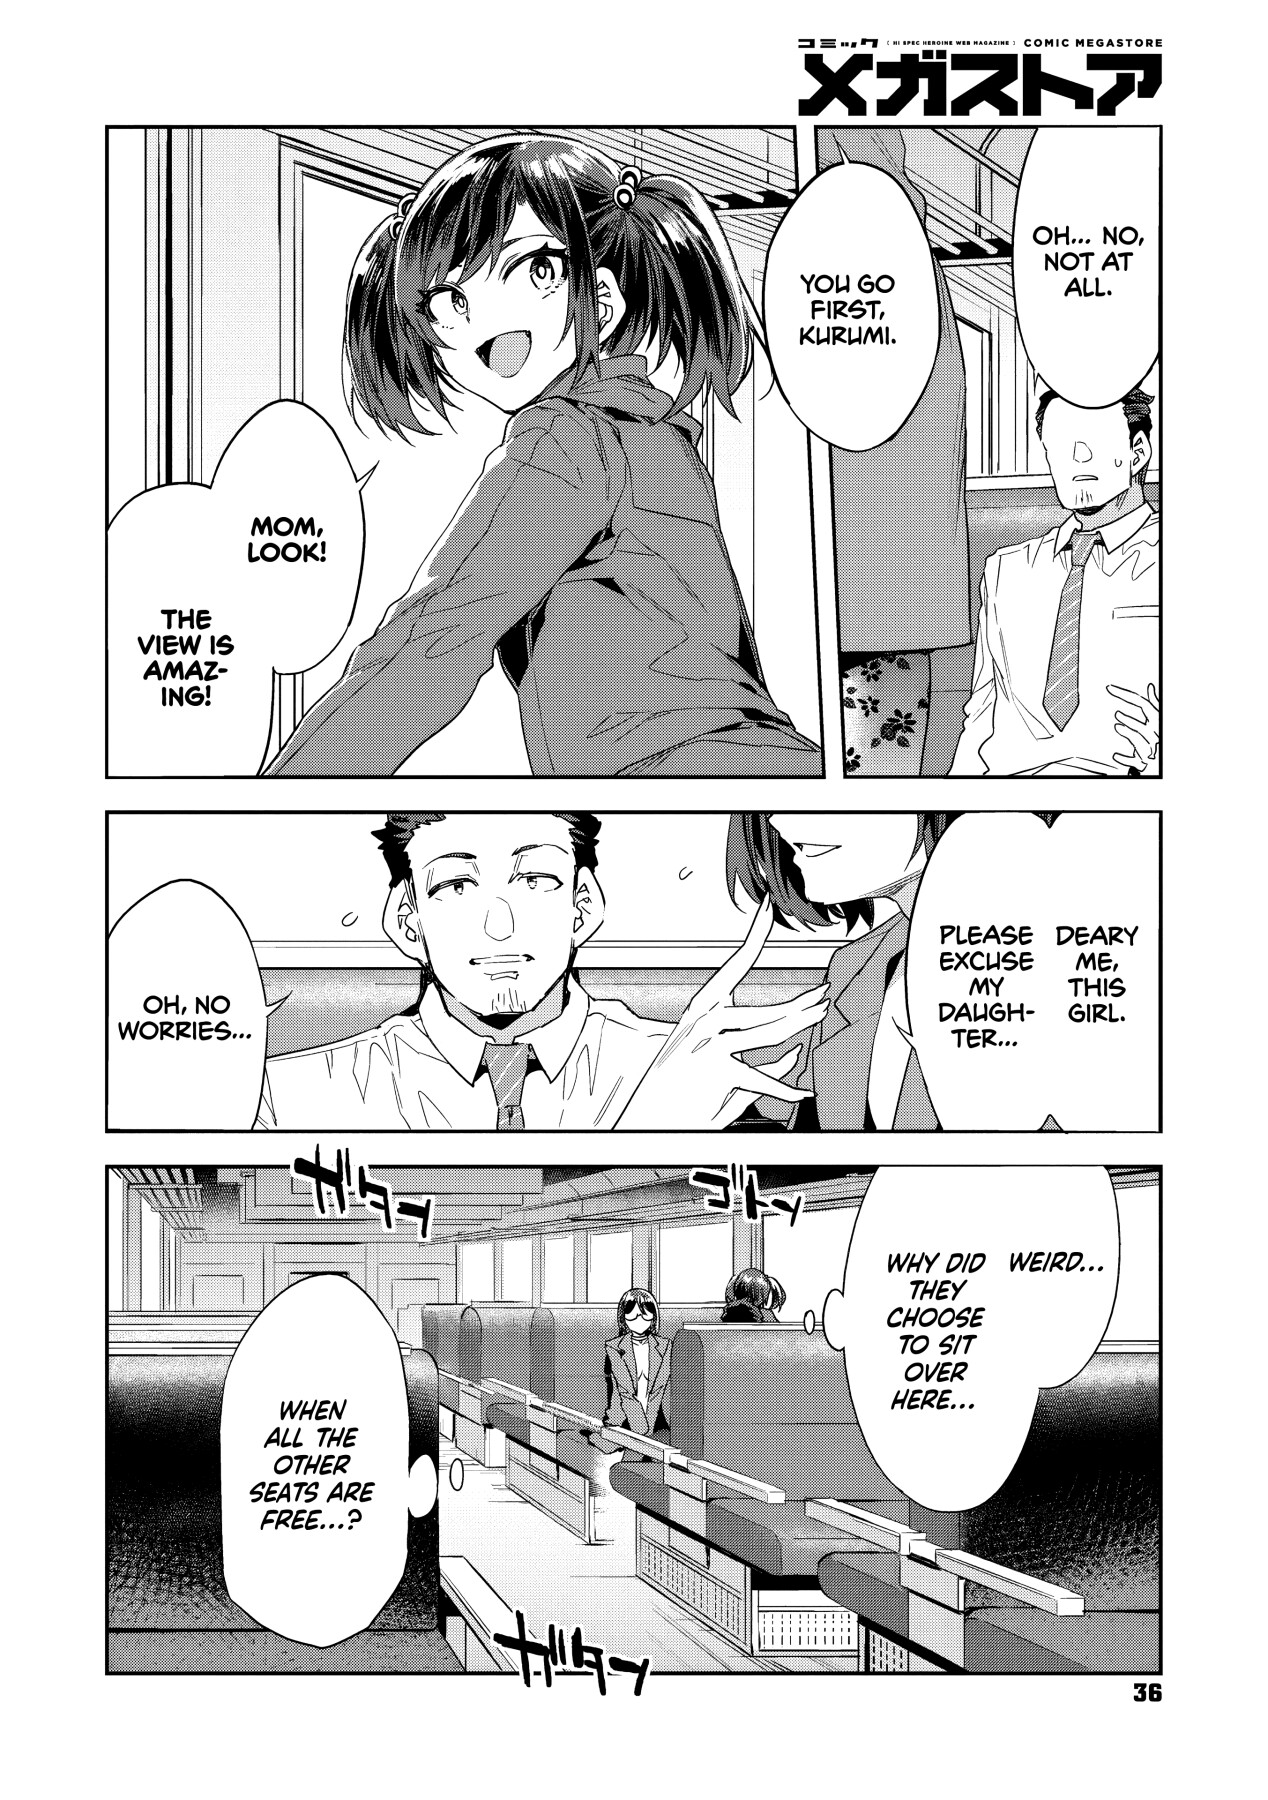 Hentai Manga Comic-The Souma Mother-Daughter Pair in the Train - Steamy Sexcapades,-Chapter 1-2